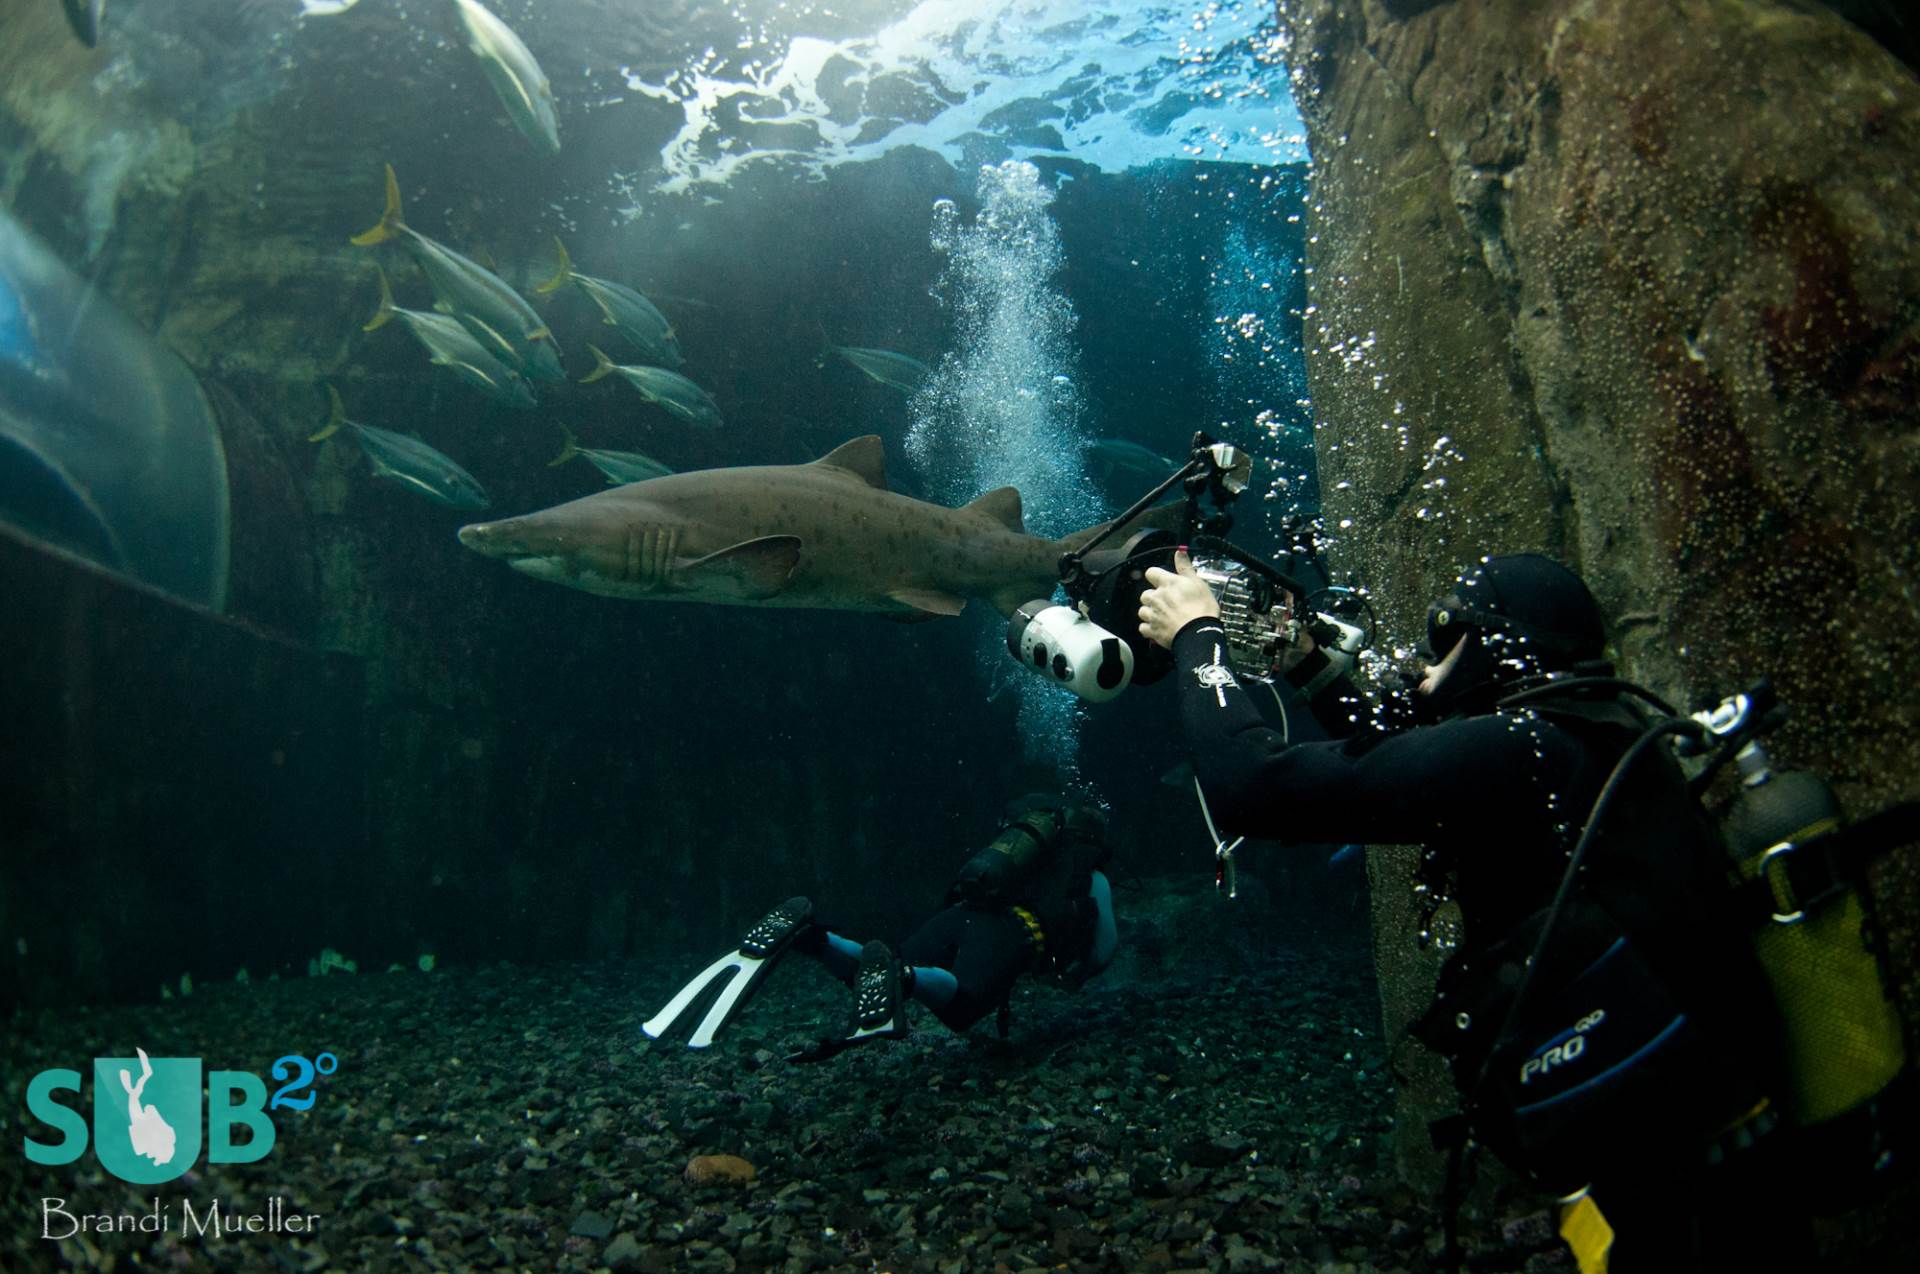 A photographer takes a shot of the large ragged-tooth shark in the Predator Exhibit.